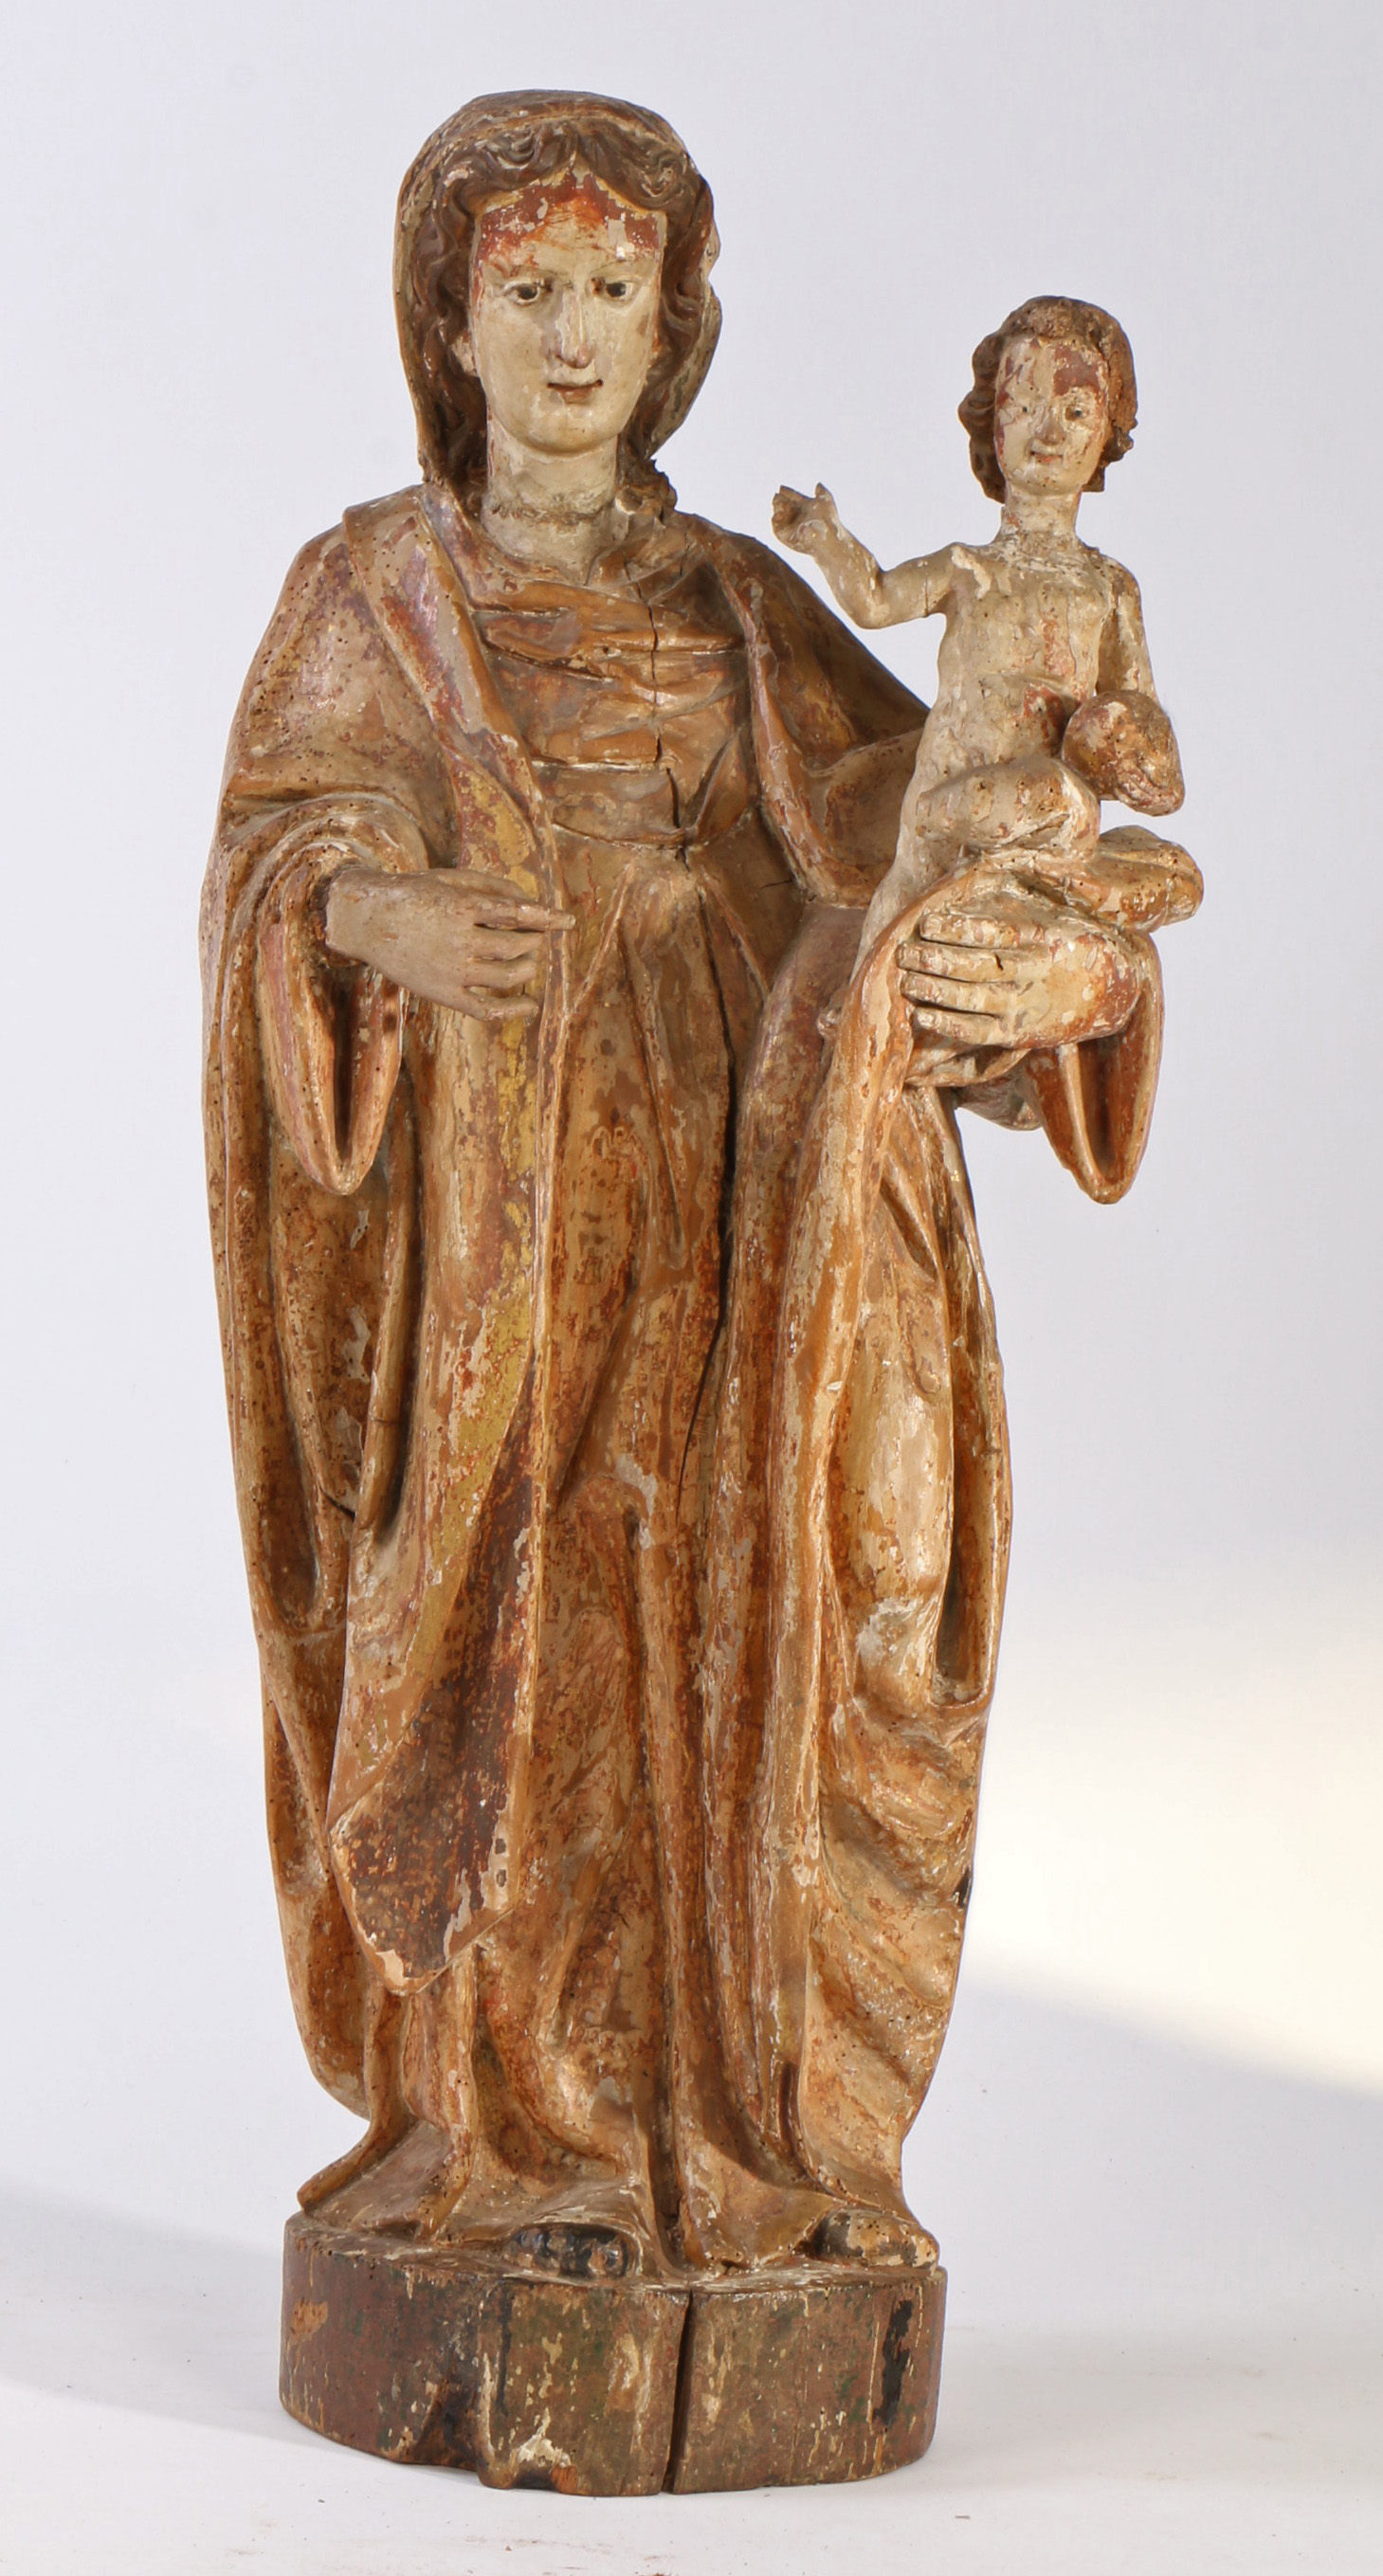 A 16th/17th century polychrome-decorated figural carving, Madonna & Child, European The Virgin - Image 3 of 3